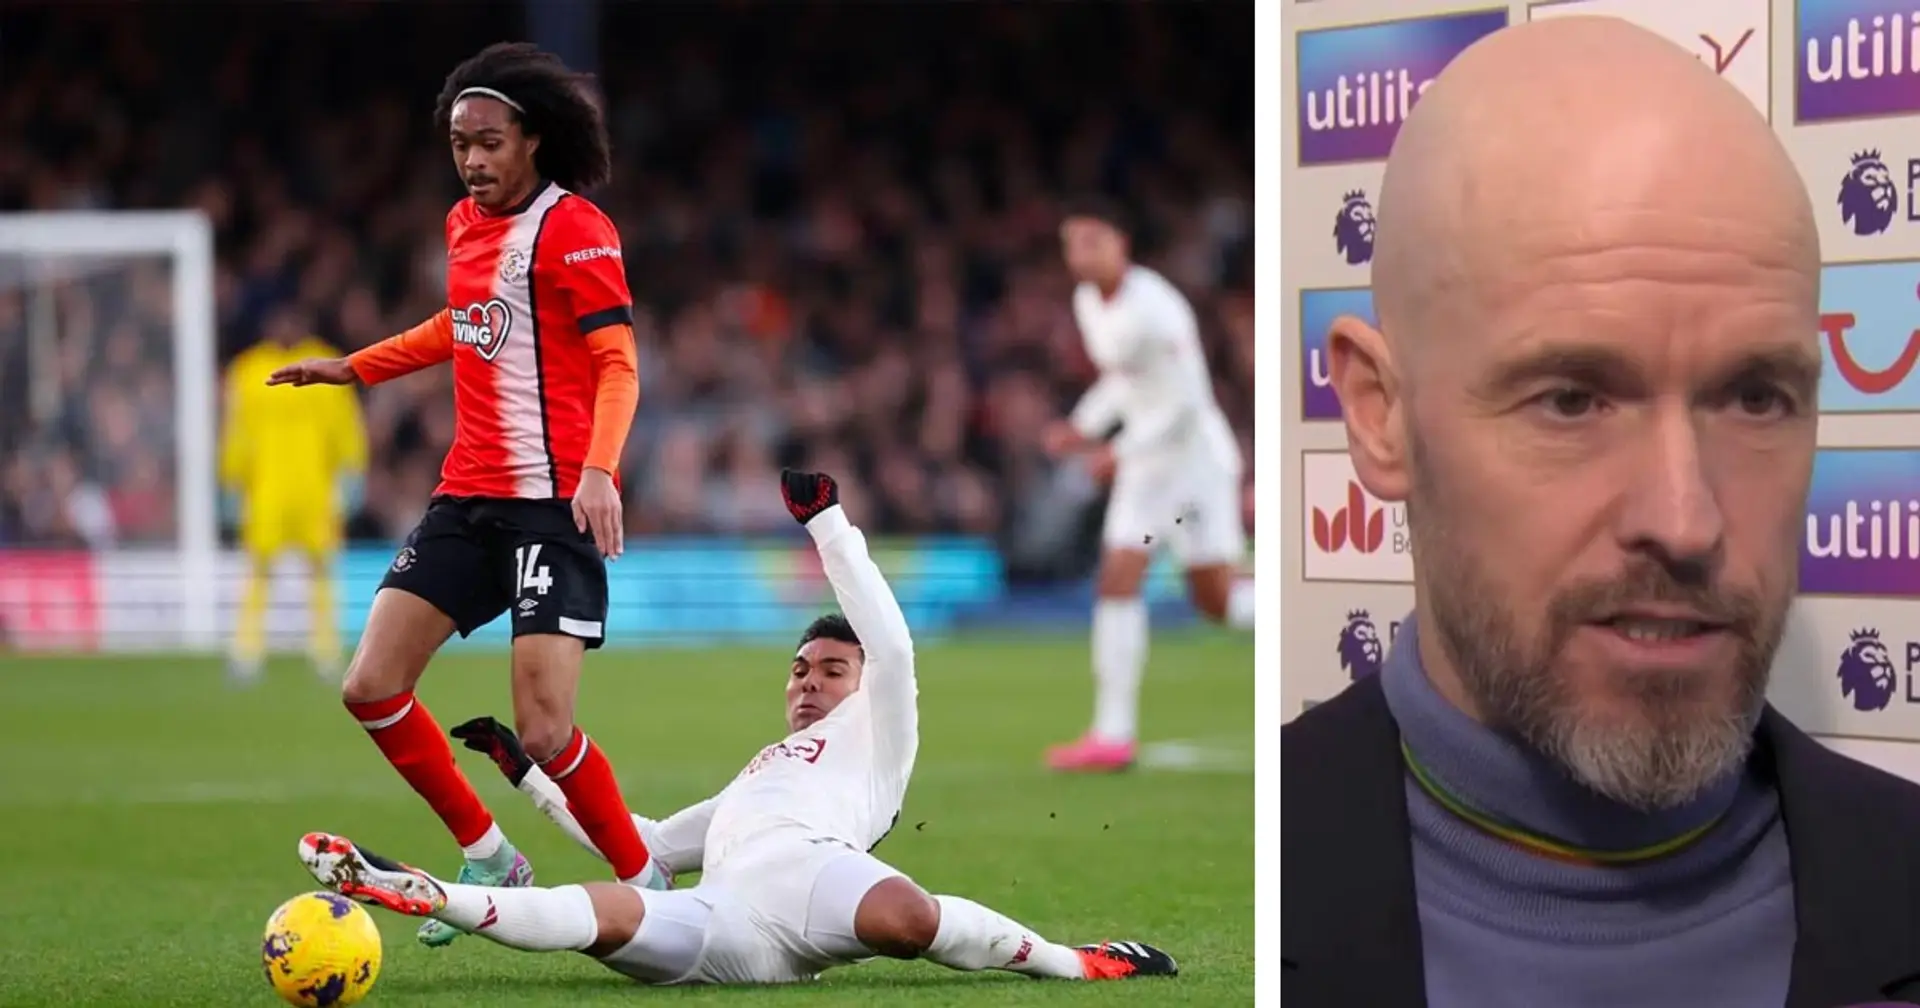 ‘There was pressure on the referee’: Ten Hag explains why he took off Maguire and Casemiro at half-time